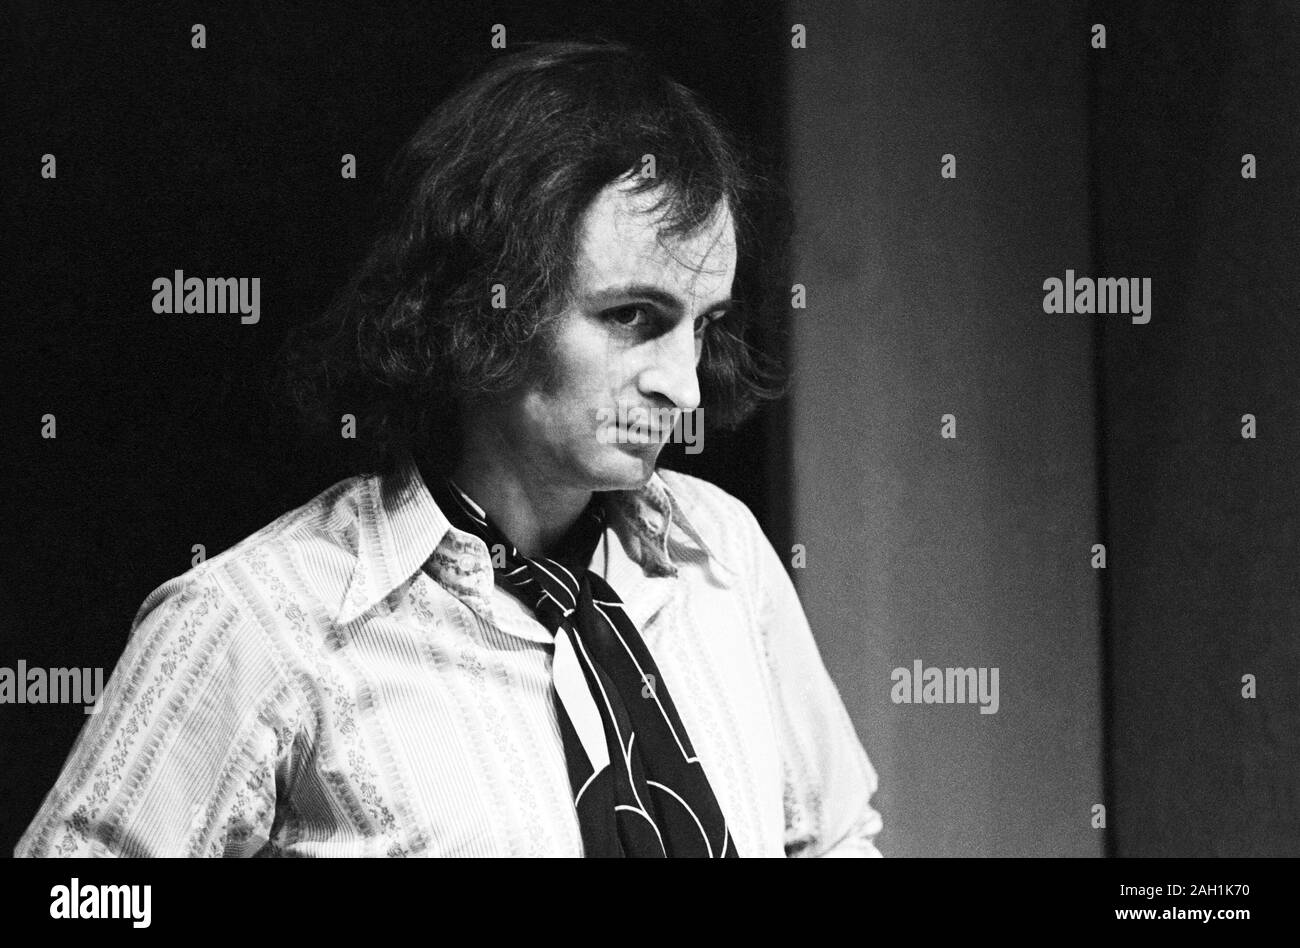 English stage director Max Stafford-Clark photographed in rehearsal for David Hare’s new play ‘Slag’ at the Royal Court Theatre, London in 1971. Born in Cambridge in 1941. Artistic Director of the Traverse Theatre, Edinburgh from 1968 to 1970, the Royal Court Theatre, London from 1979 to 1993 and Out of Joint touring theatre company from 1993 to 2017. Stock Photo